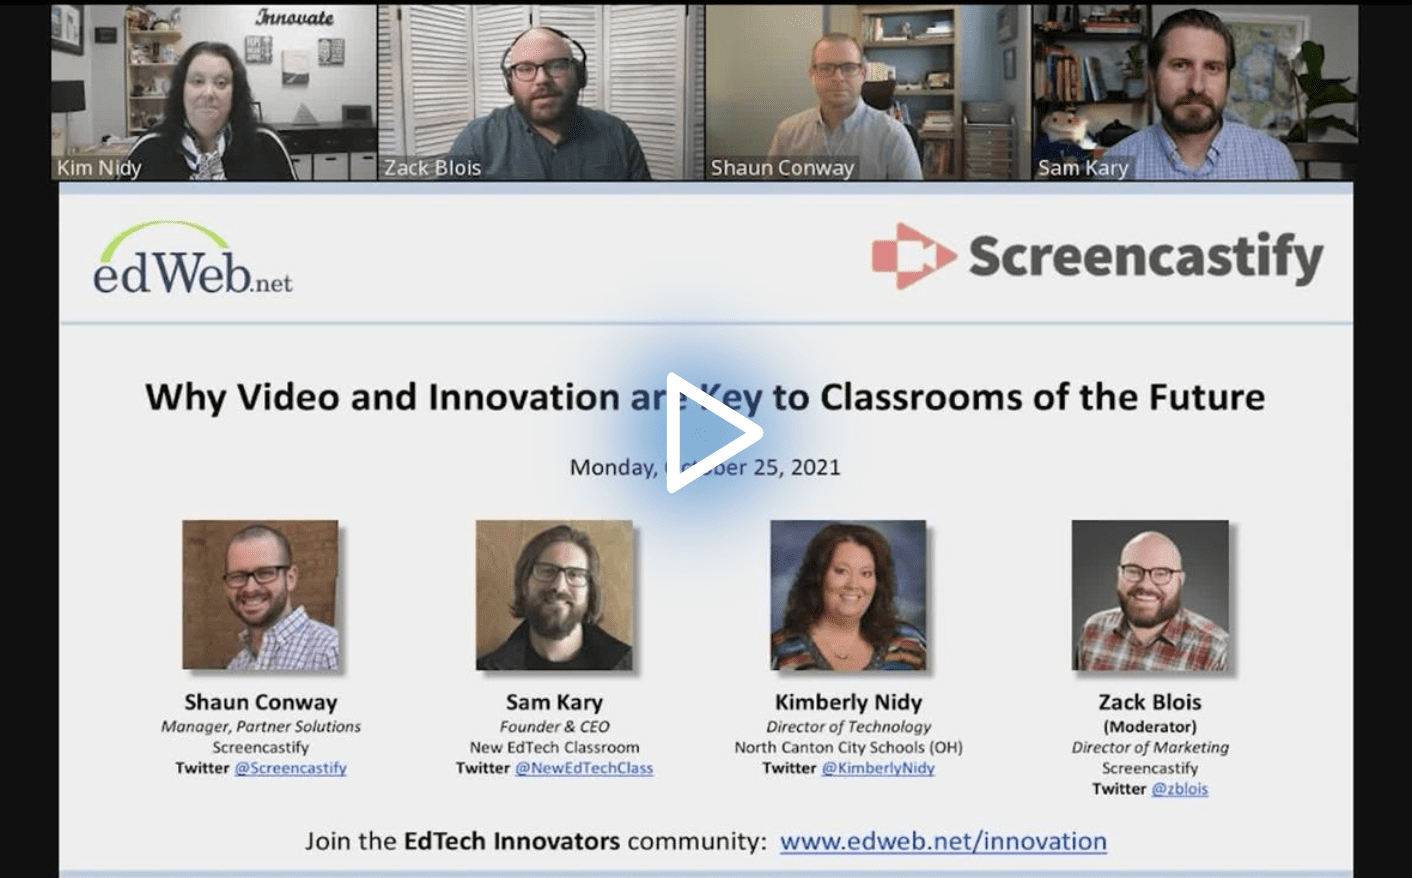 Why Video and Innovation are Key to Classrooms of the Future edLeader Panel recording link